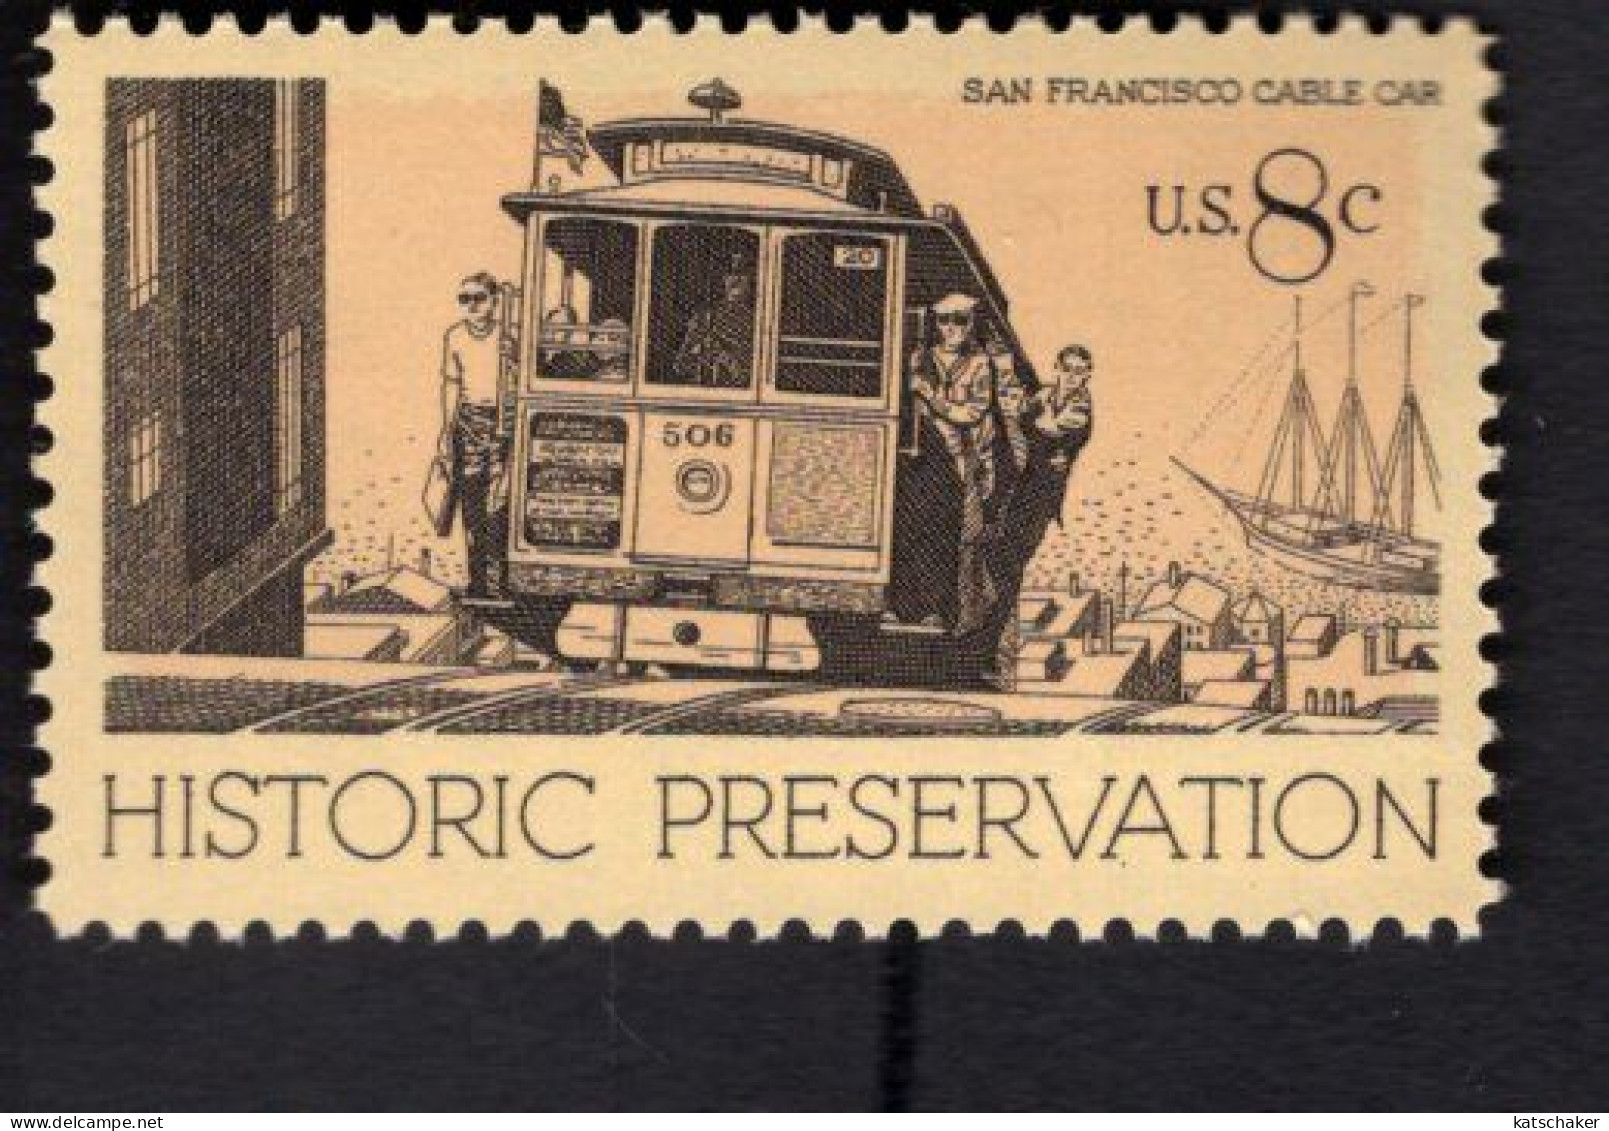 2015412470 1971 SCOTT 1442 (XX) POSTFRIS MINT NEVER HINGED - HISTORIC PRESERVATION SAN FRANCISCO CABLE CAR - Unused Stamps